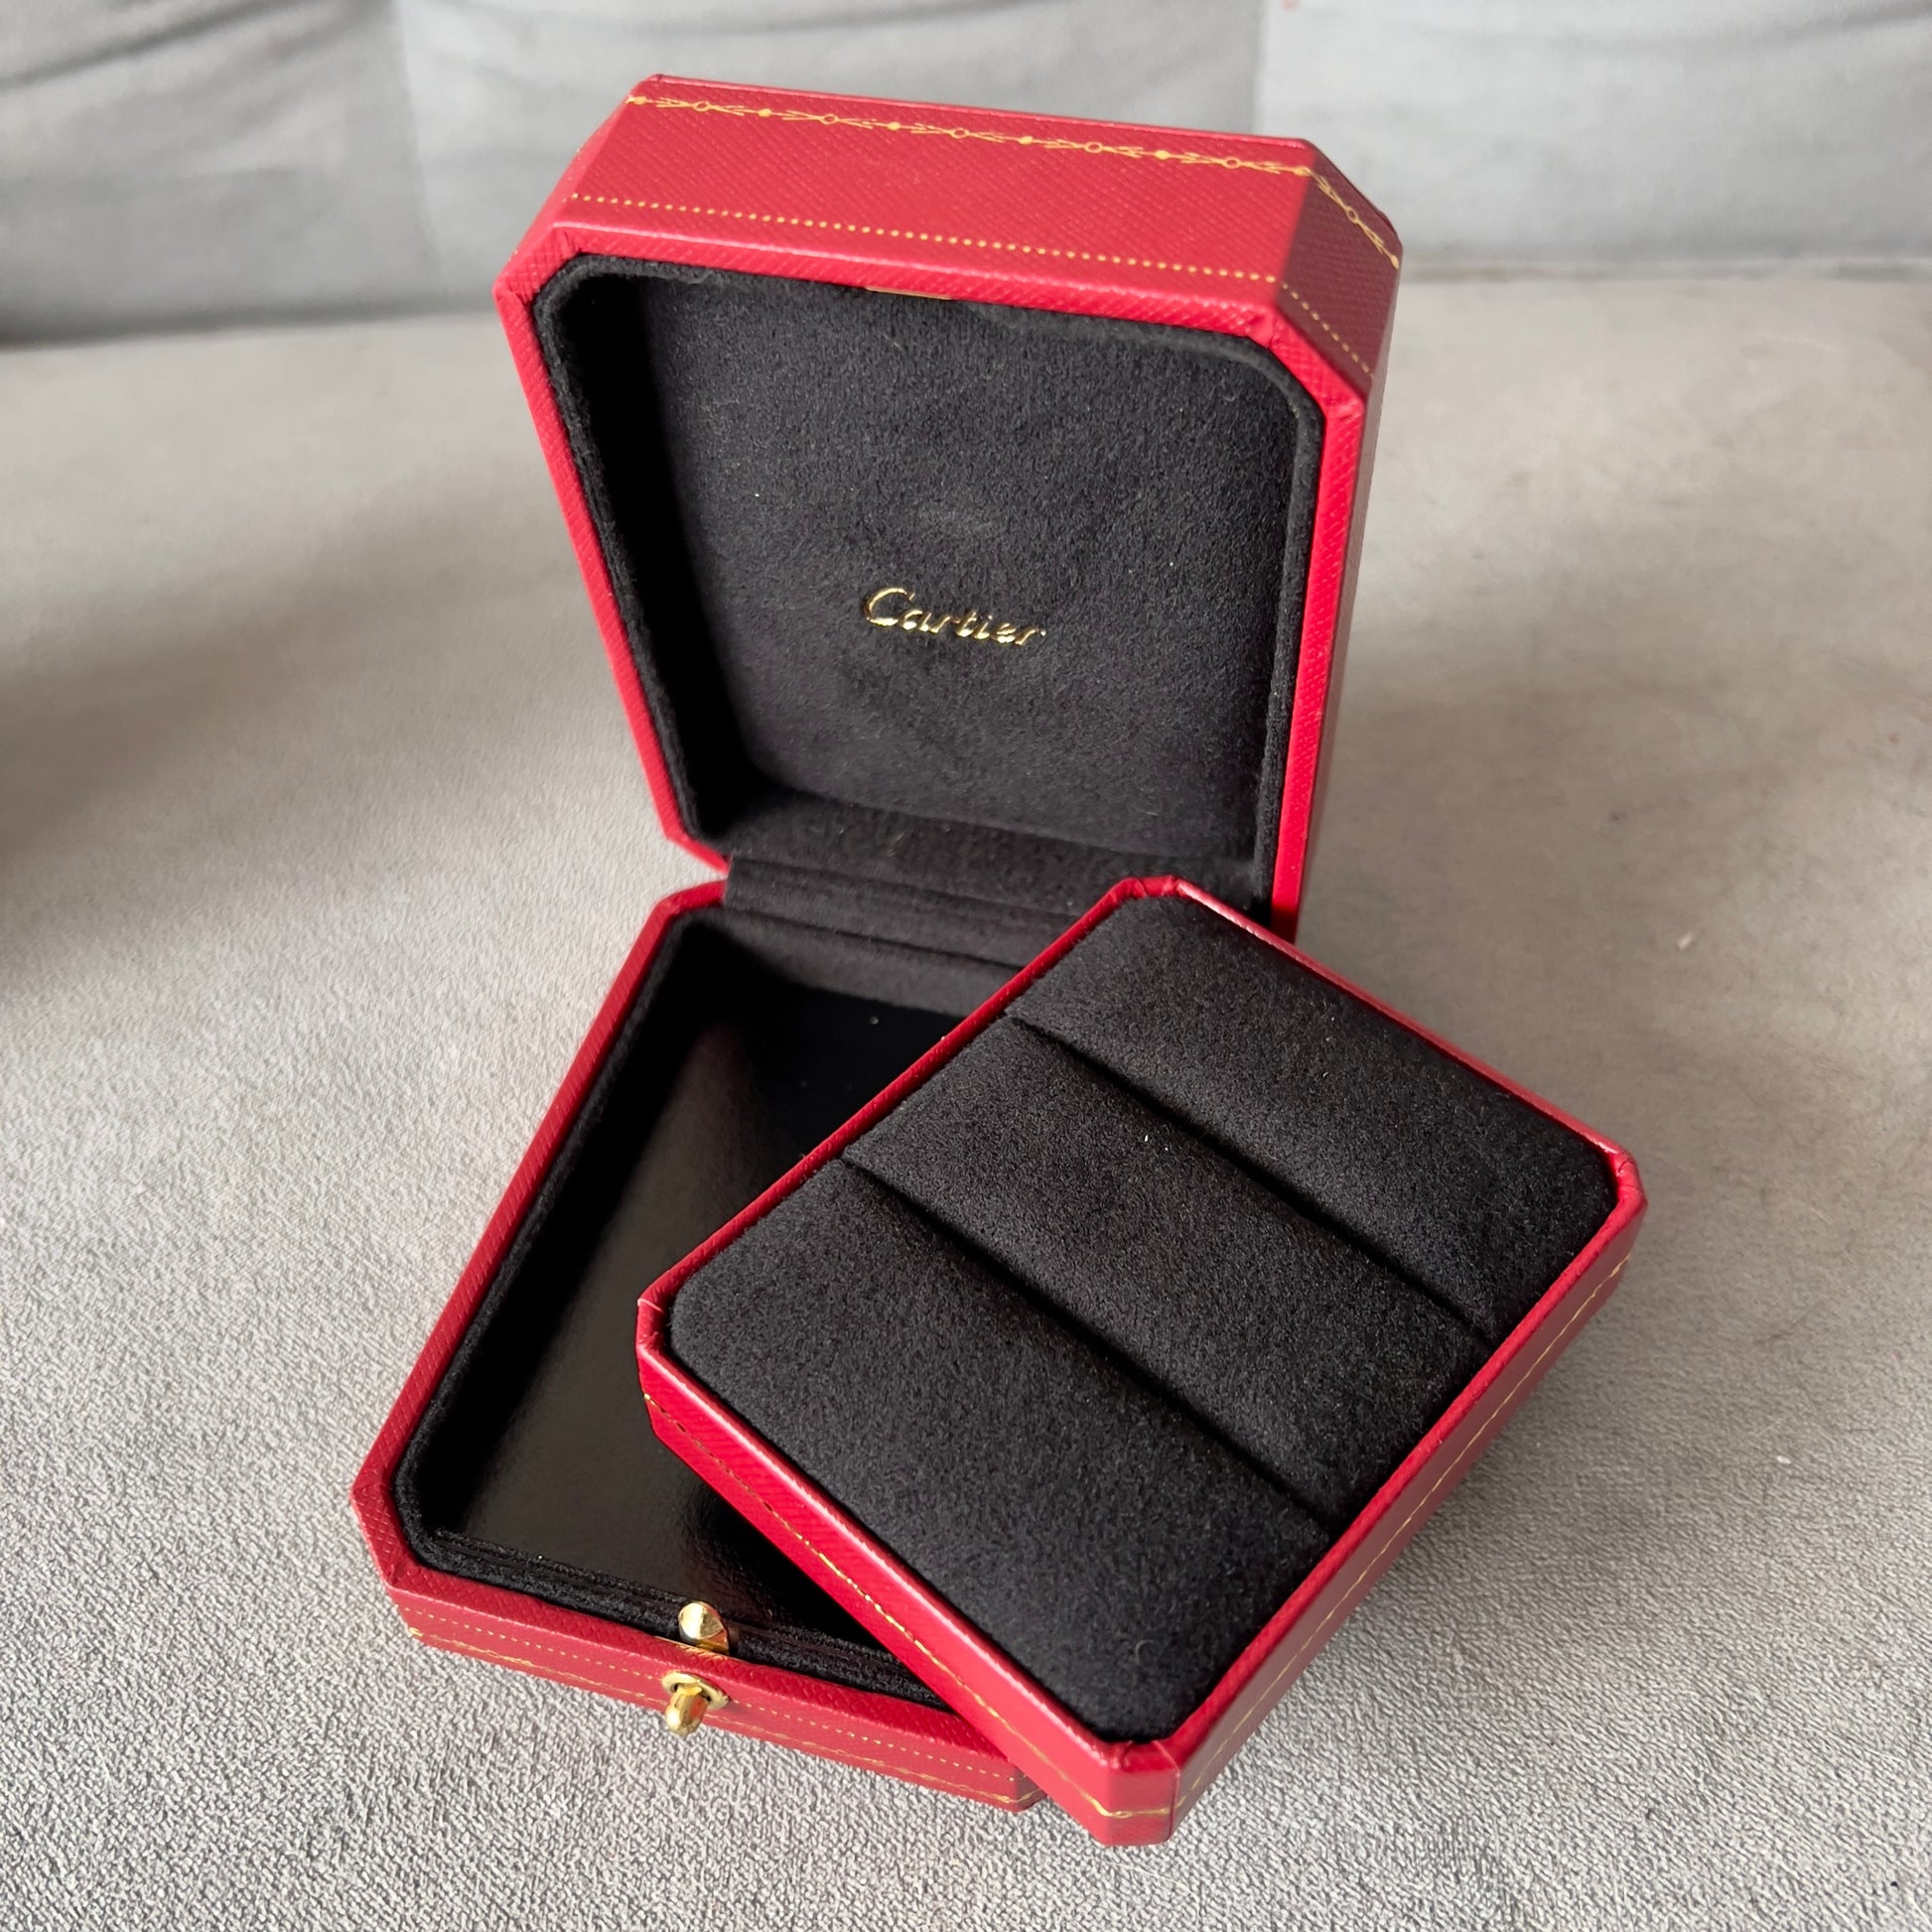 CARTIER Double Alliance Ring Box